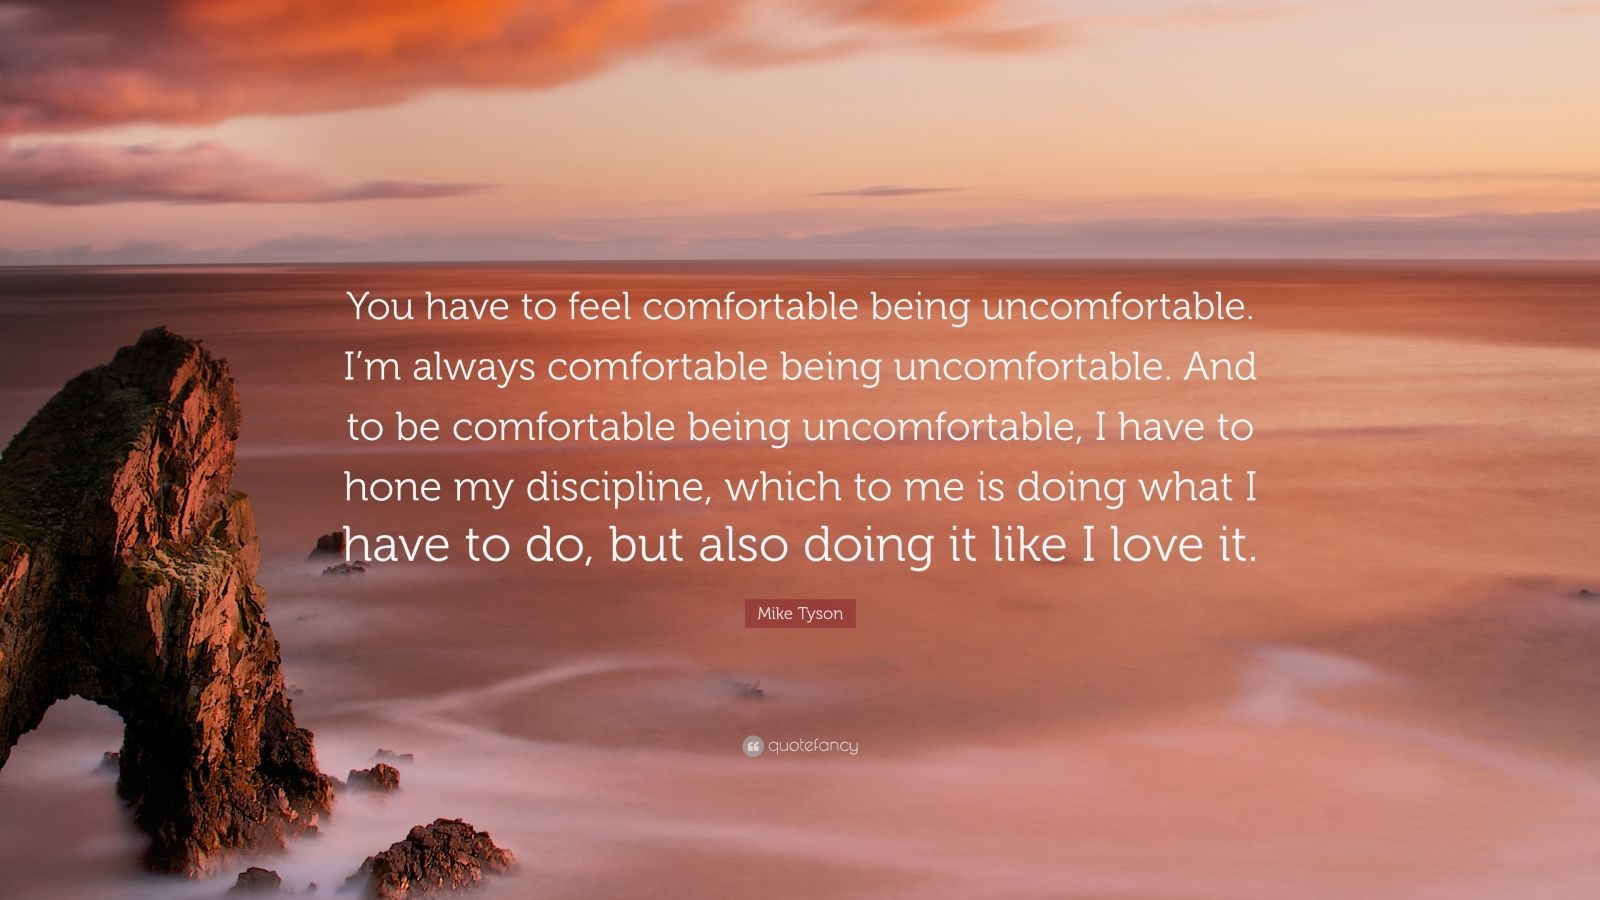 4842842 Mike Tyson Quote You have to feel comfortable being uncomfortable